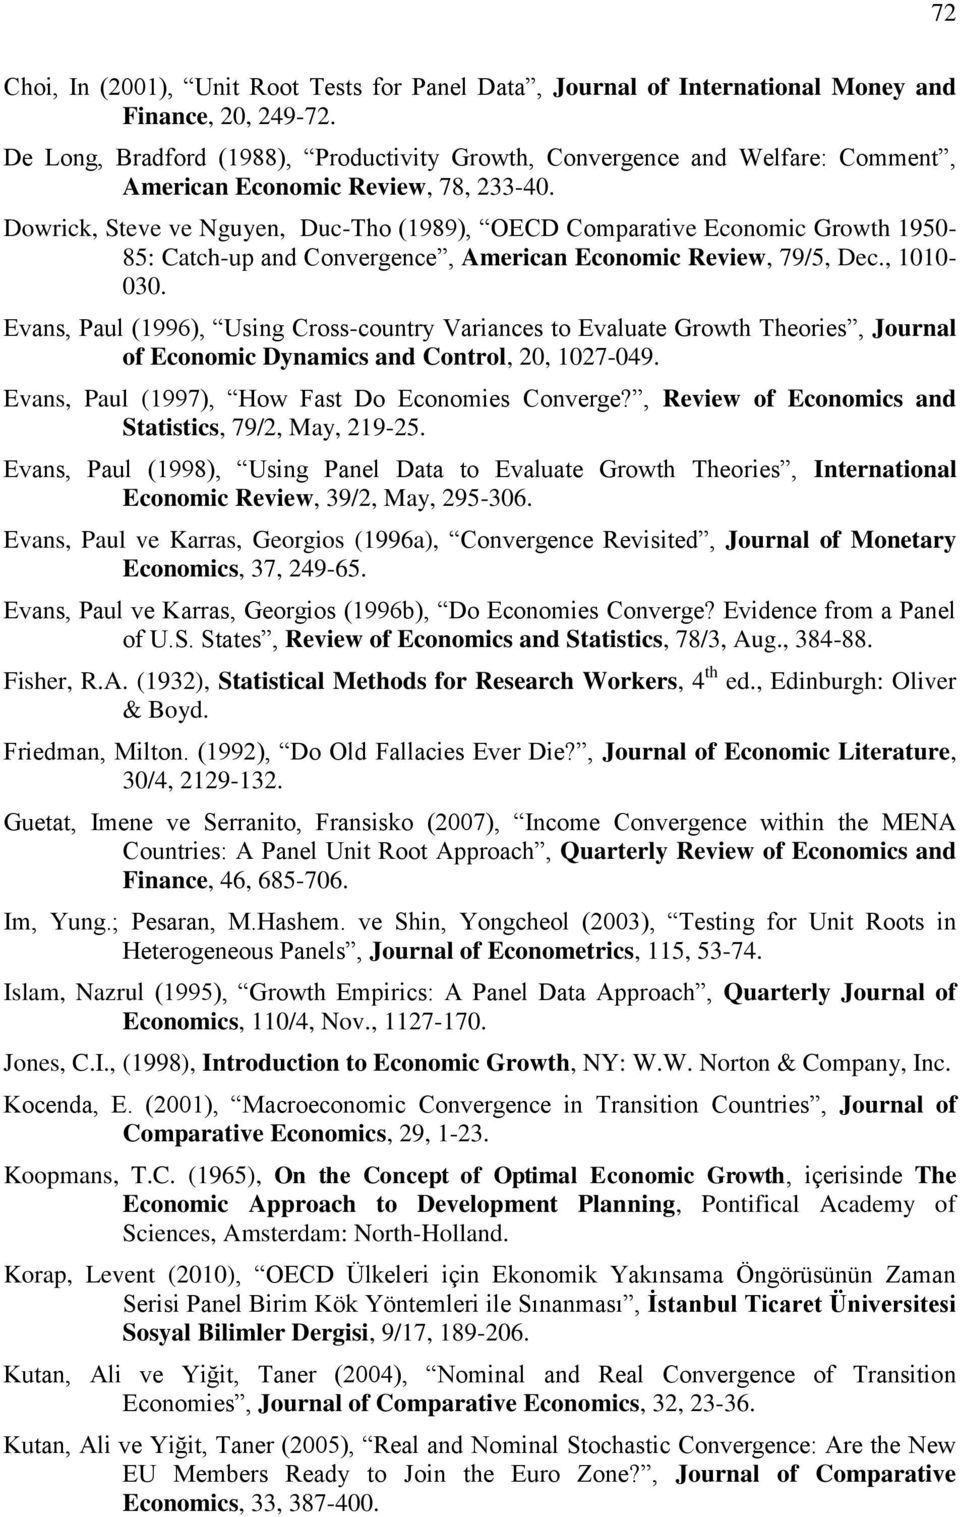 Dowrick, Steve ve Nguyen, Duc-Tho (1989), OECD Comparative Economic Growth 1950-85: Catch-up and Convergence, American Economic Review, 79/5, Dec., 1010-030.